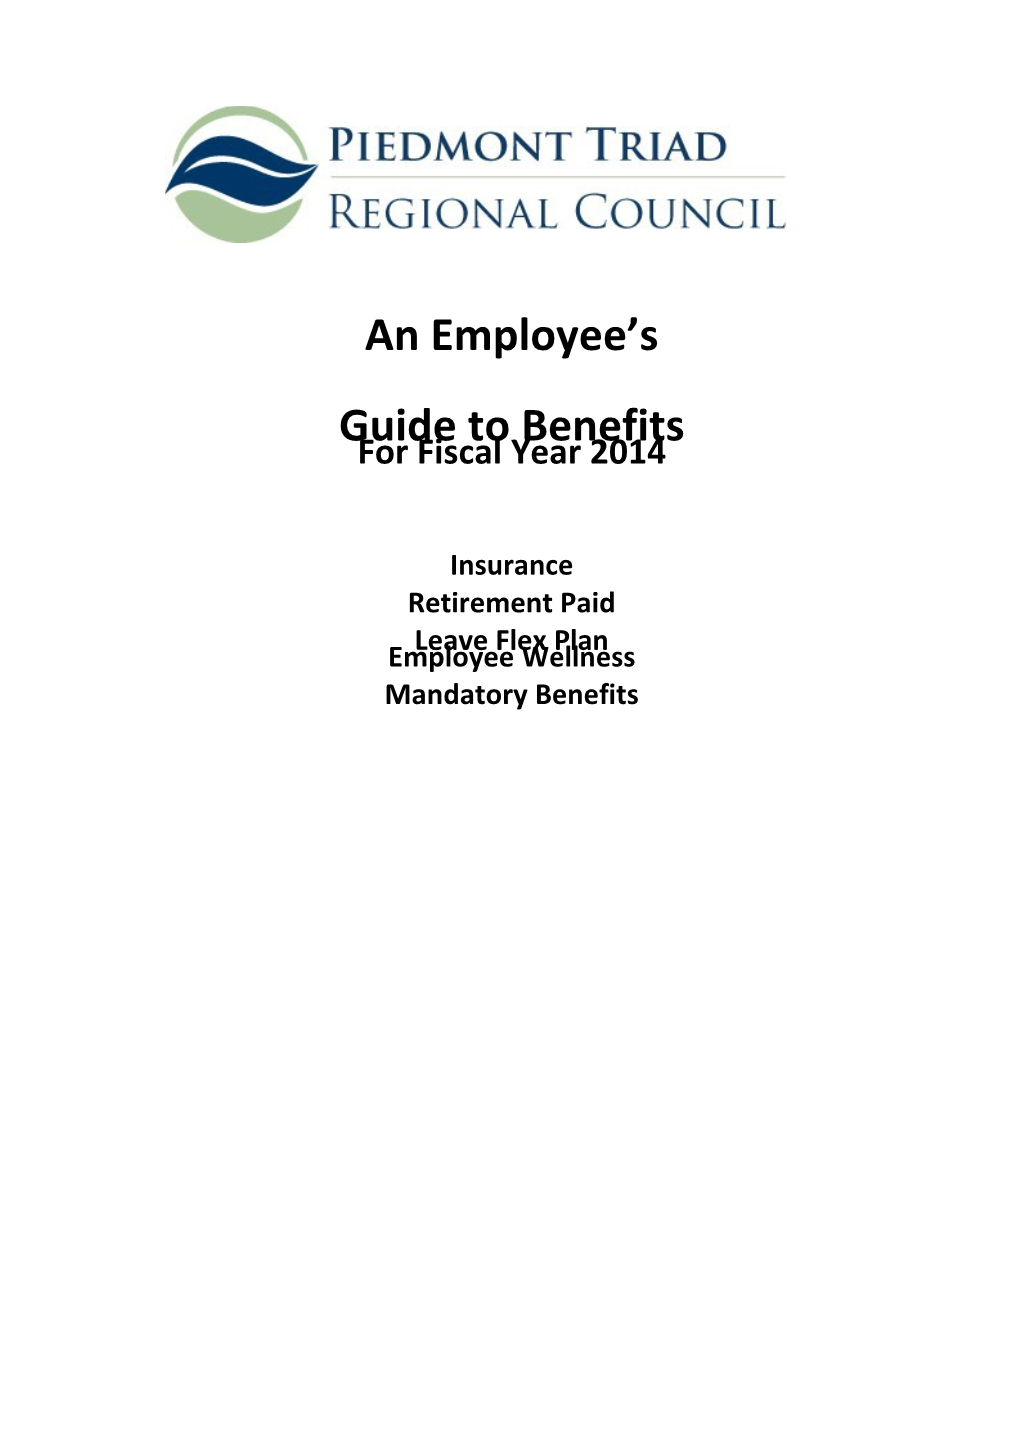 Employee Guide to Benefits 2014 - 2